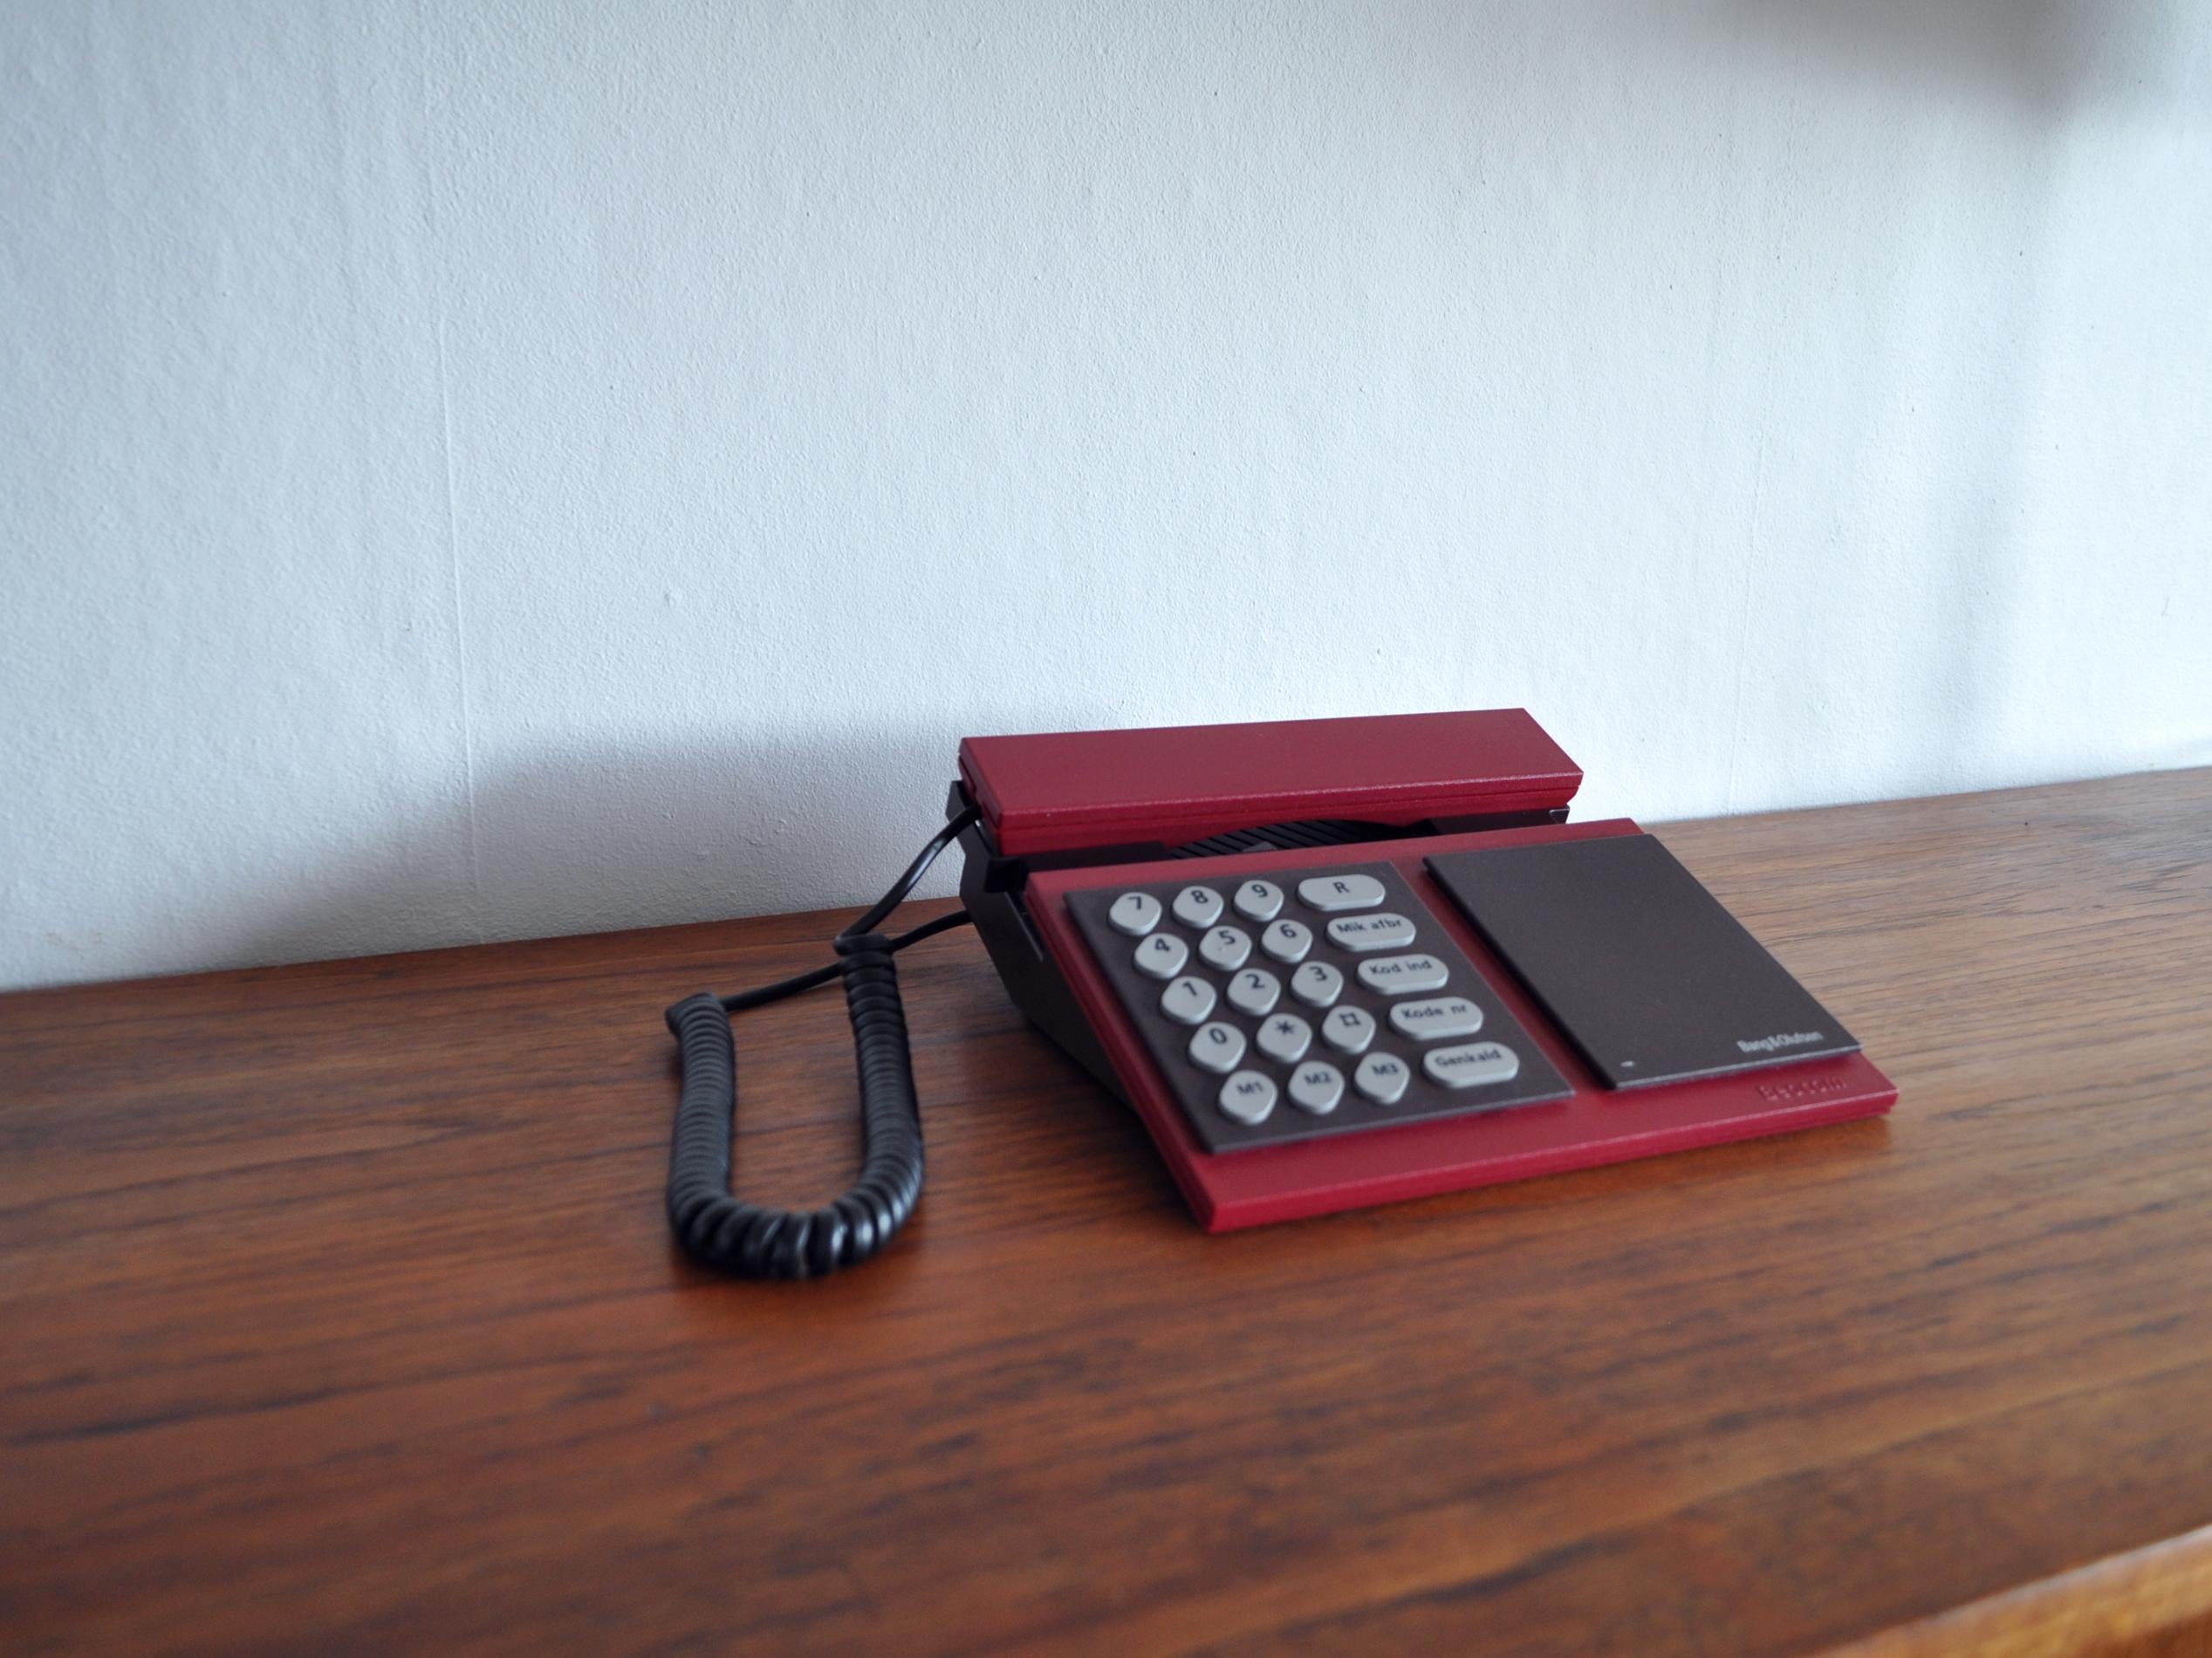 Scandinavian Modern Iconic Beocom 600 Telephone from 1986 by Bang & Olusfen For Sale